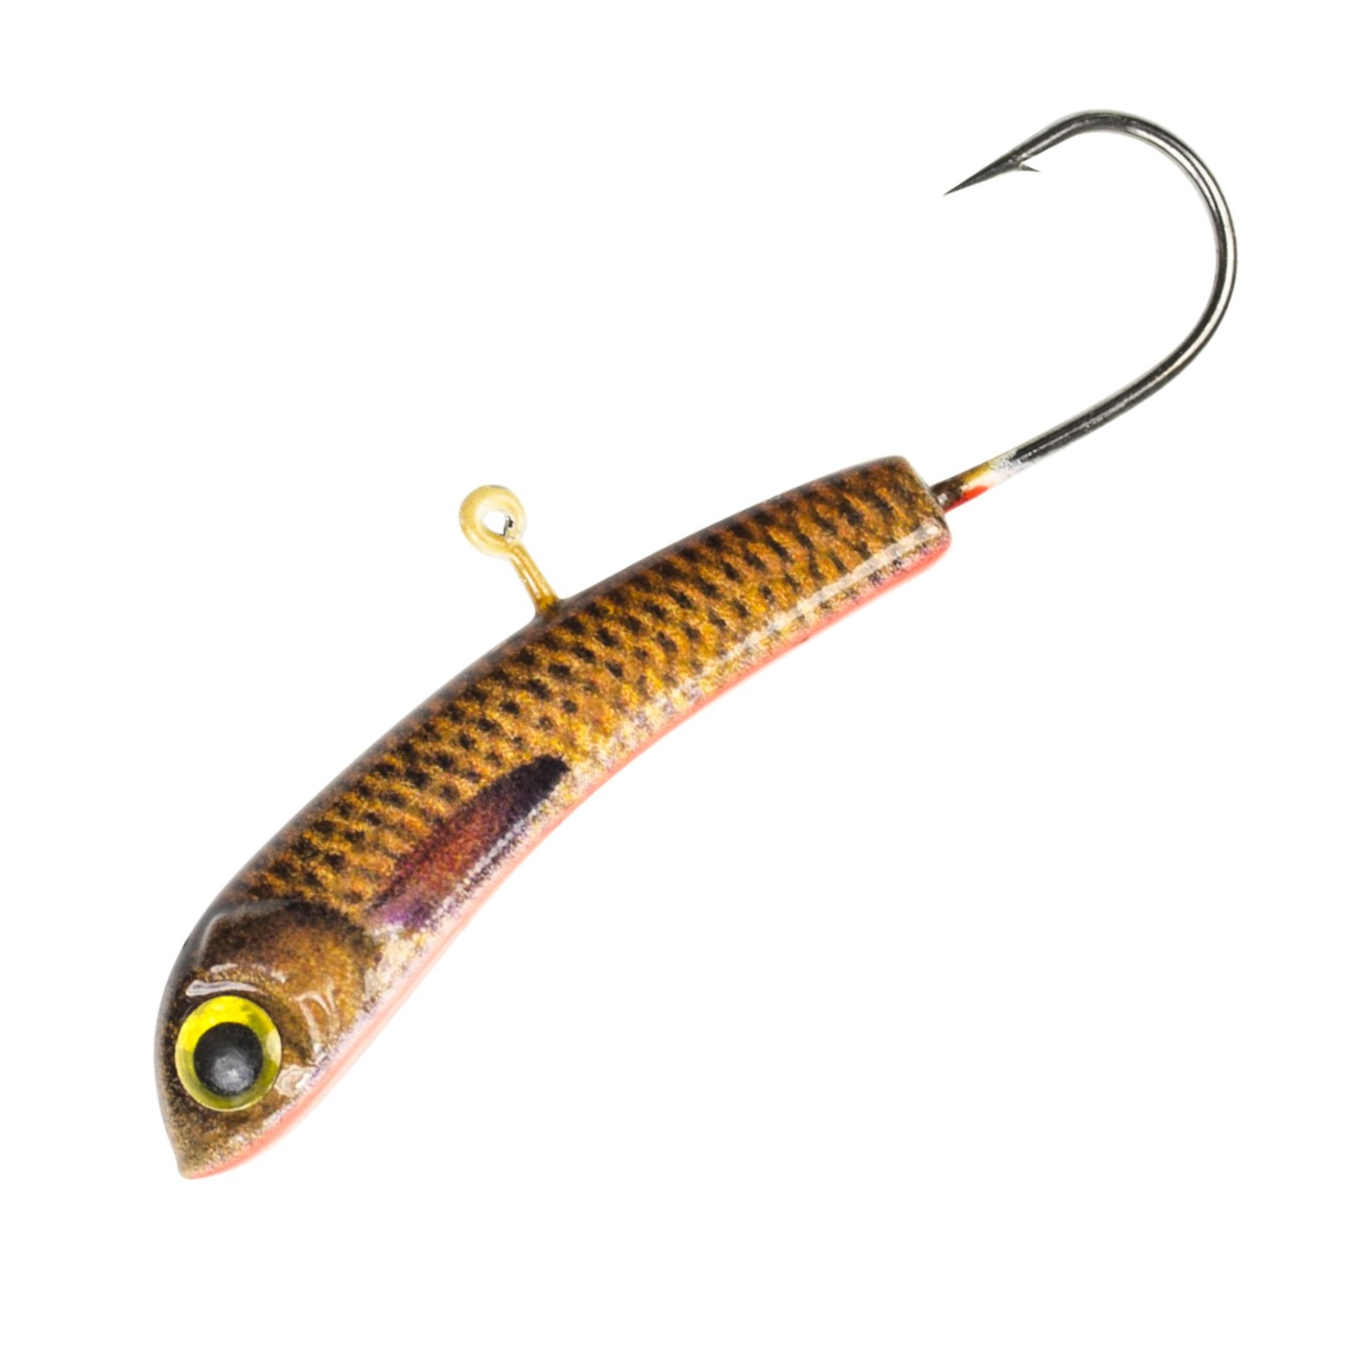  Luhr-Jensen Cut Bait Head with Rigging Fish Candy UV